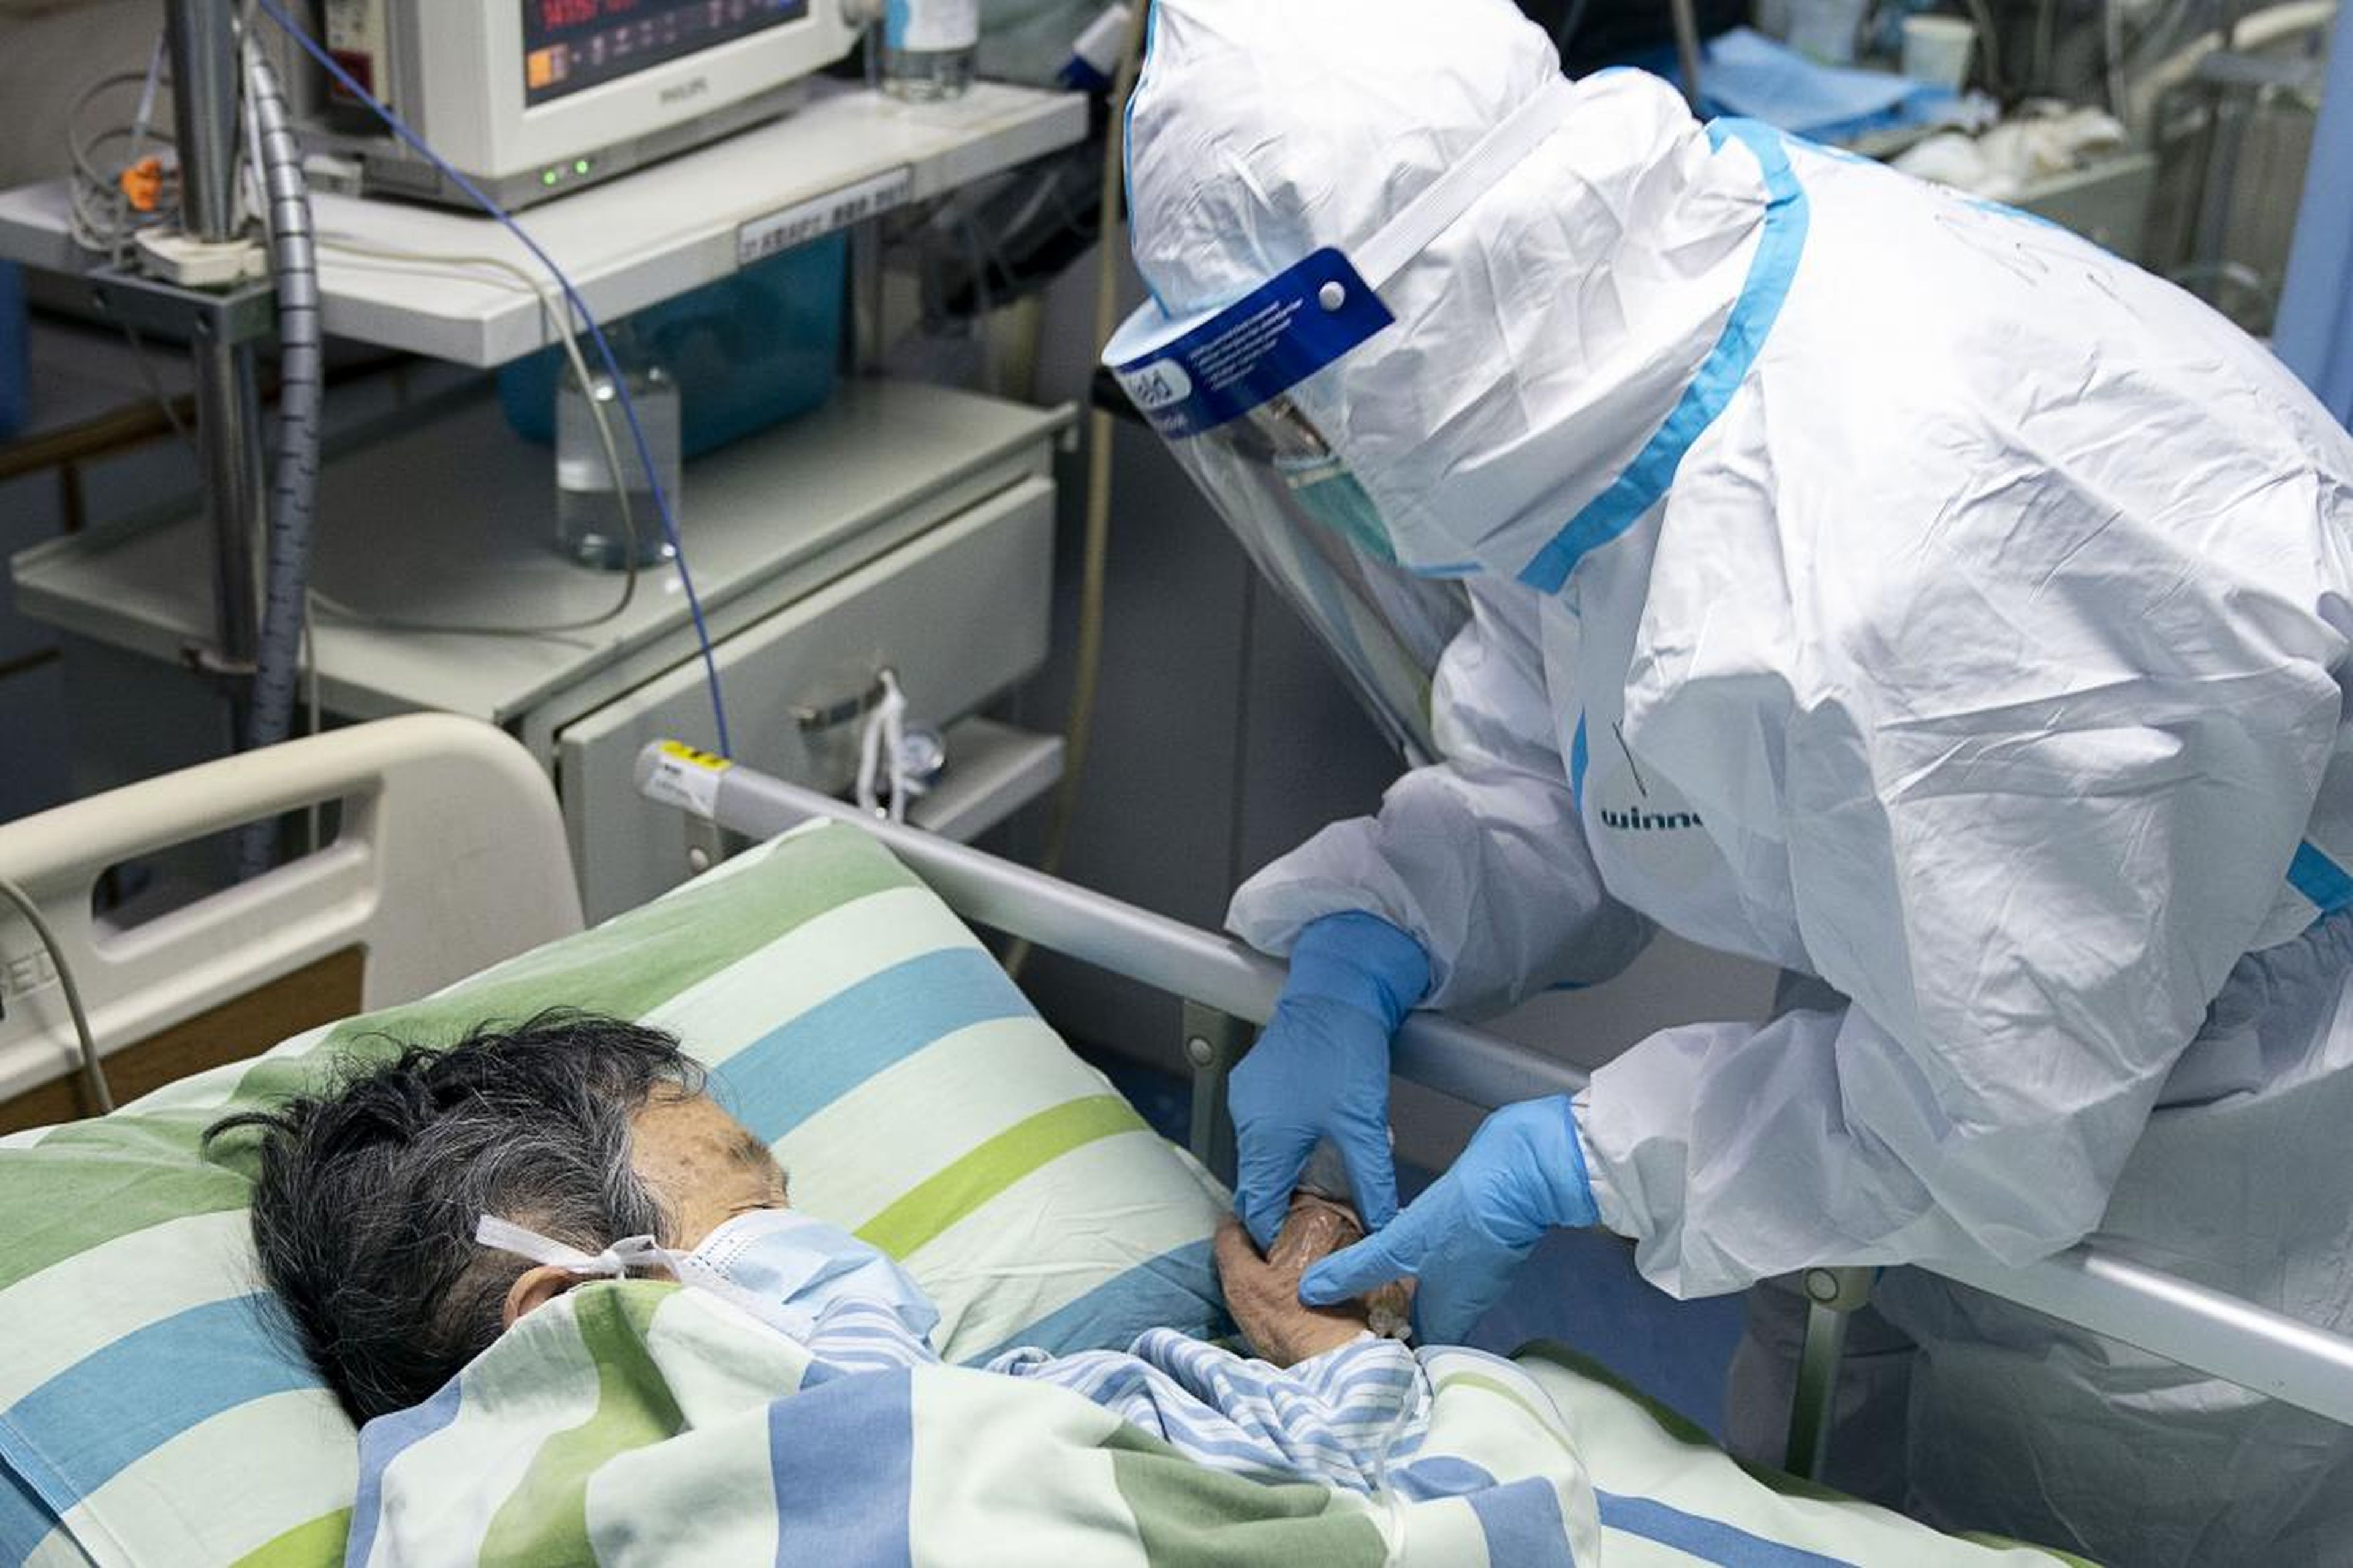 A medical worker attends to a patient in the intensive care unit at Zhongnan Hospital of Wuhan University in China, January 24, 2020. This photo was released by China's Xinhua News Agency.